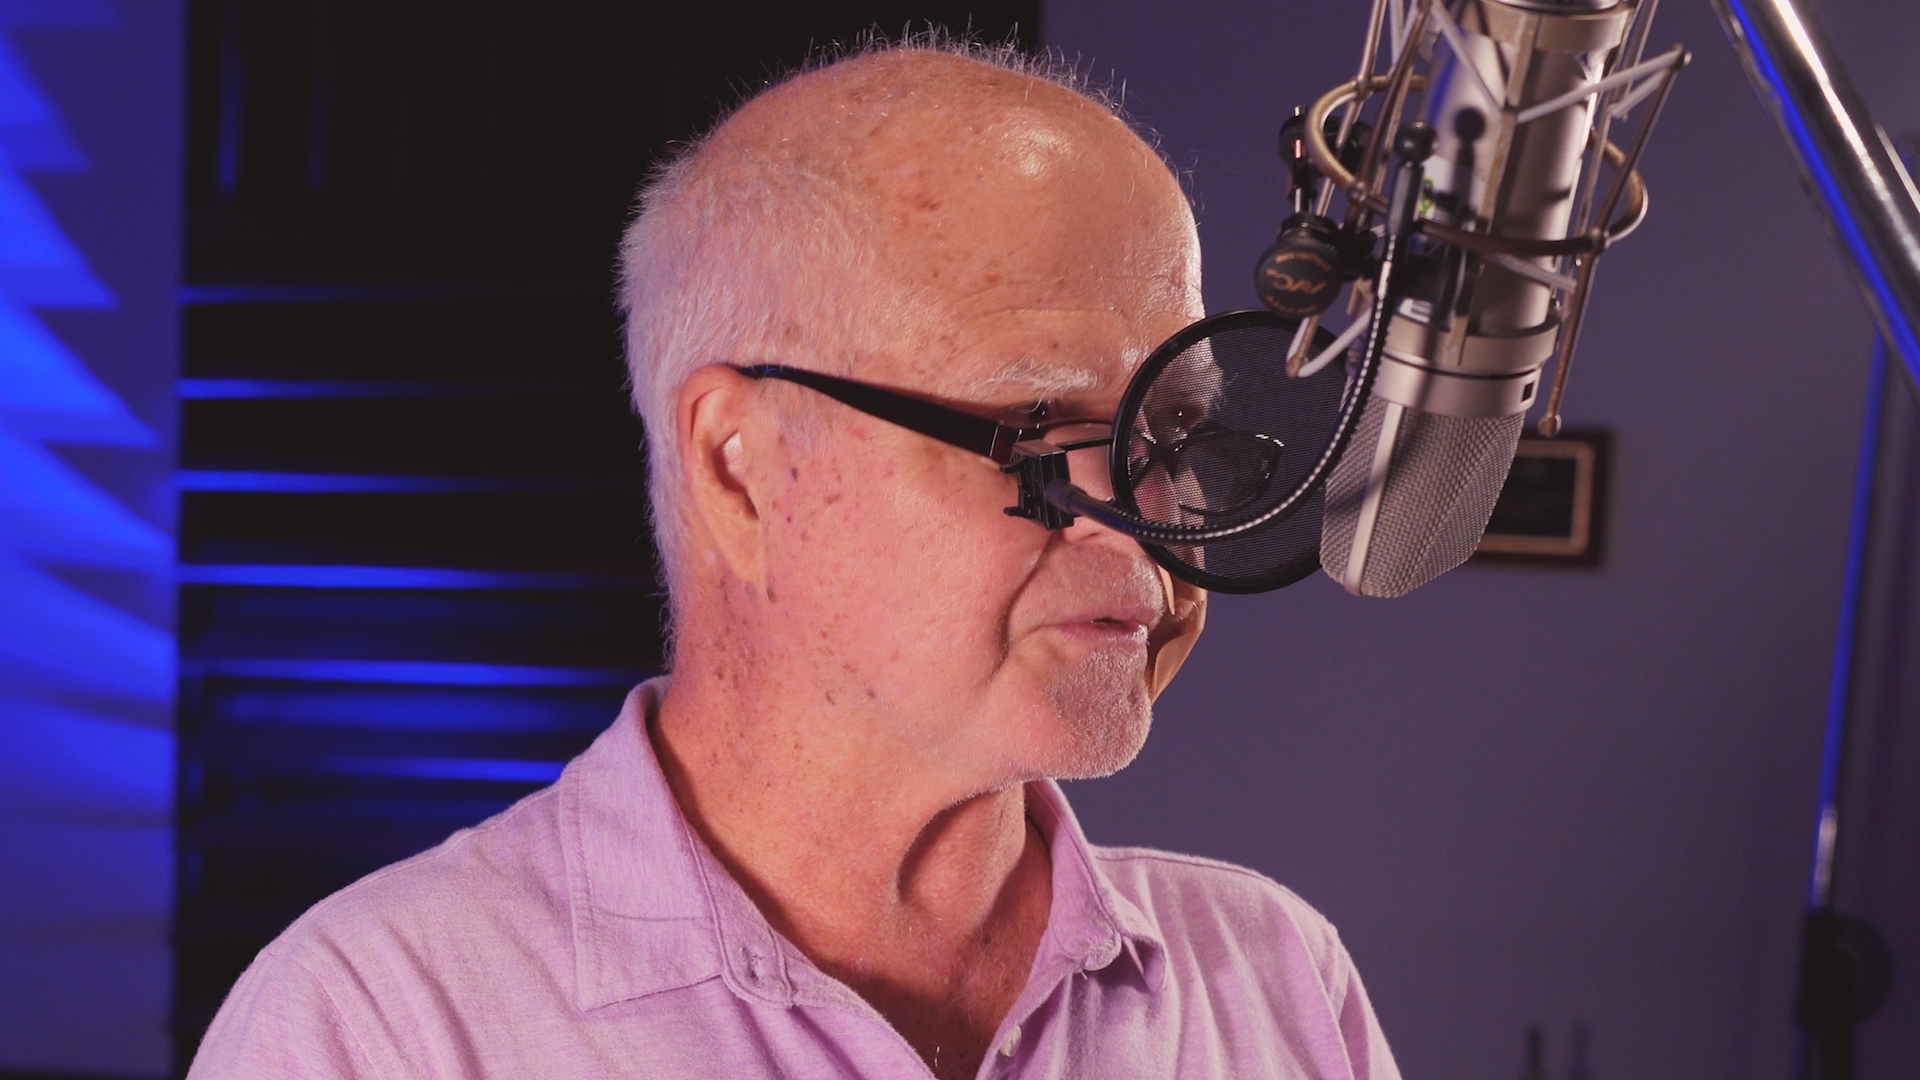 An older man wearing glasses is singing into a microphone.